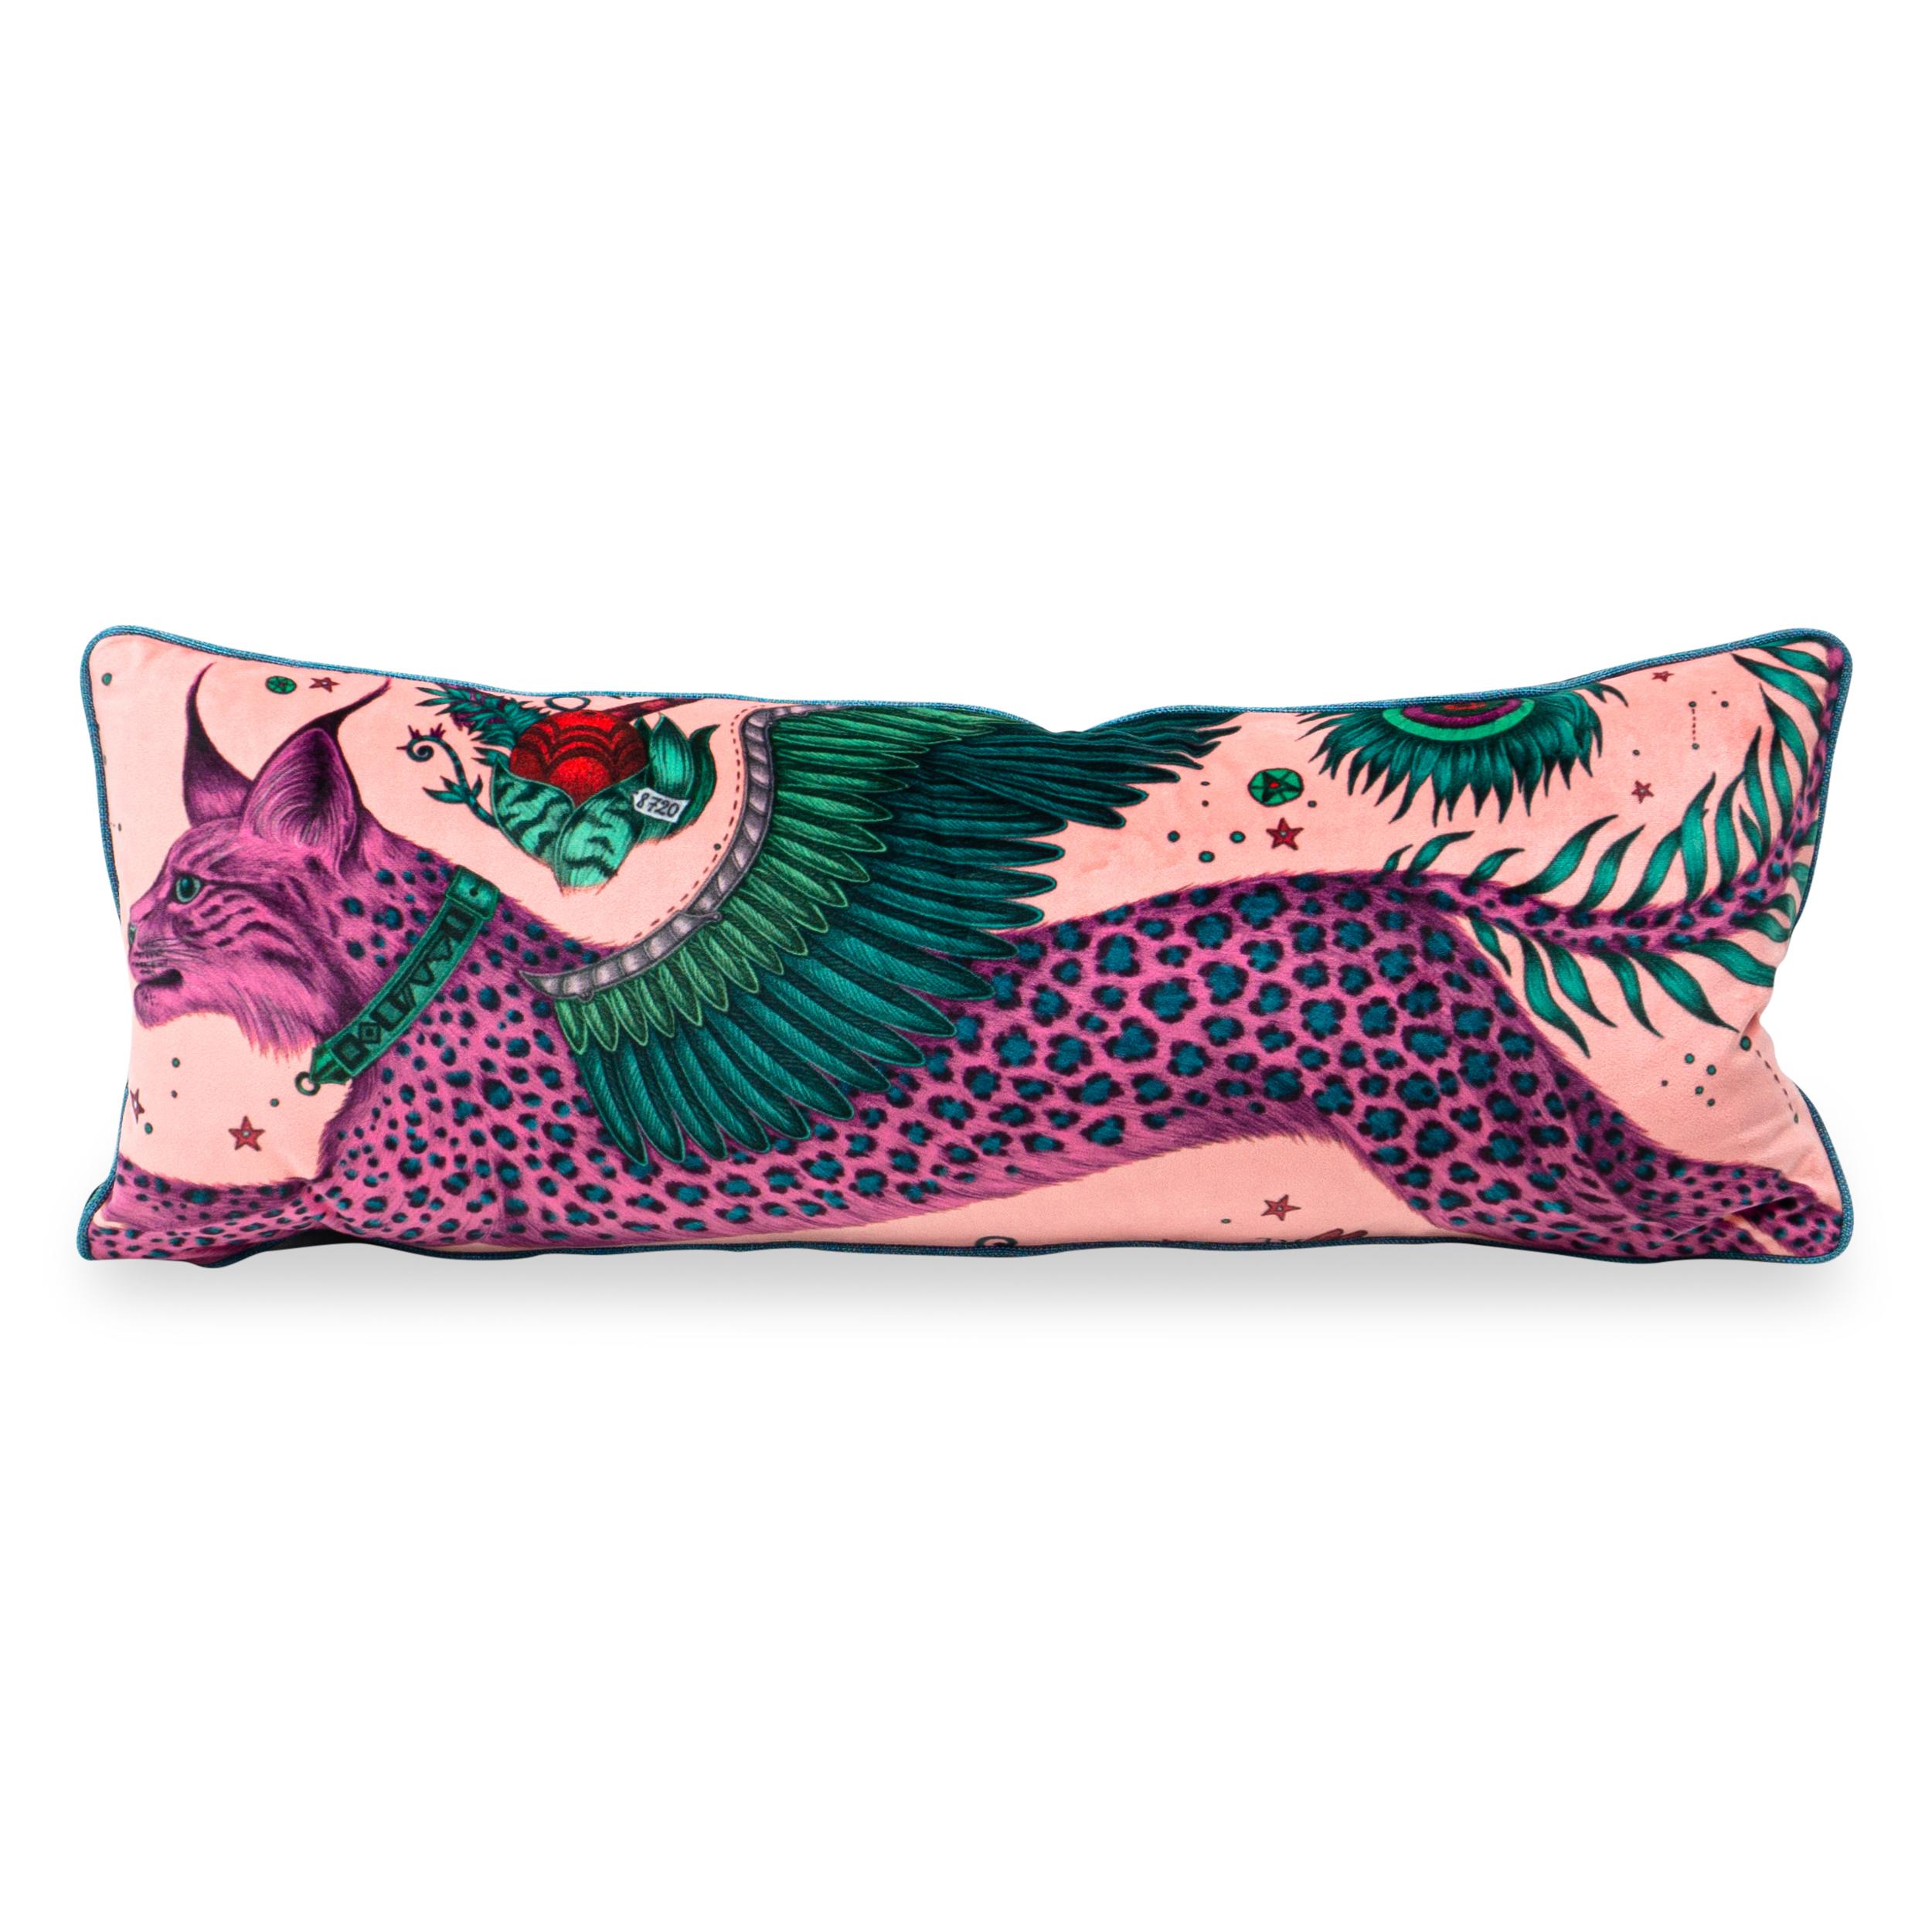 A pair of lumbar pillows with fantastical printed velvet face, a lush jade velvet back and woven contrast welting.

Measurements:
Overall: 23” W x 5” D x 9” H

Price as shown: $1,204 as a pair
COM Price: $215 each
Customization may change